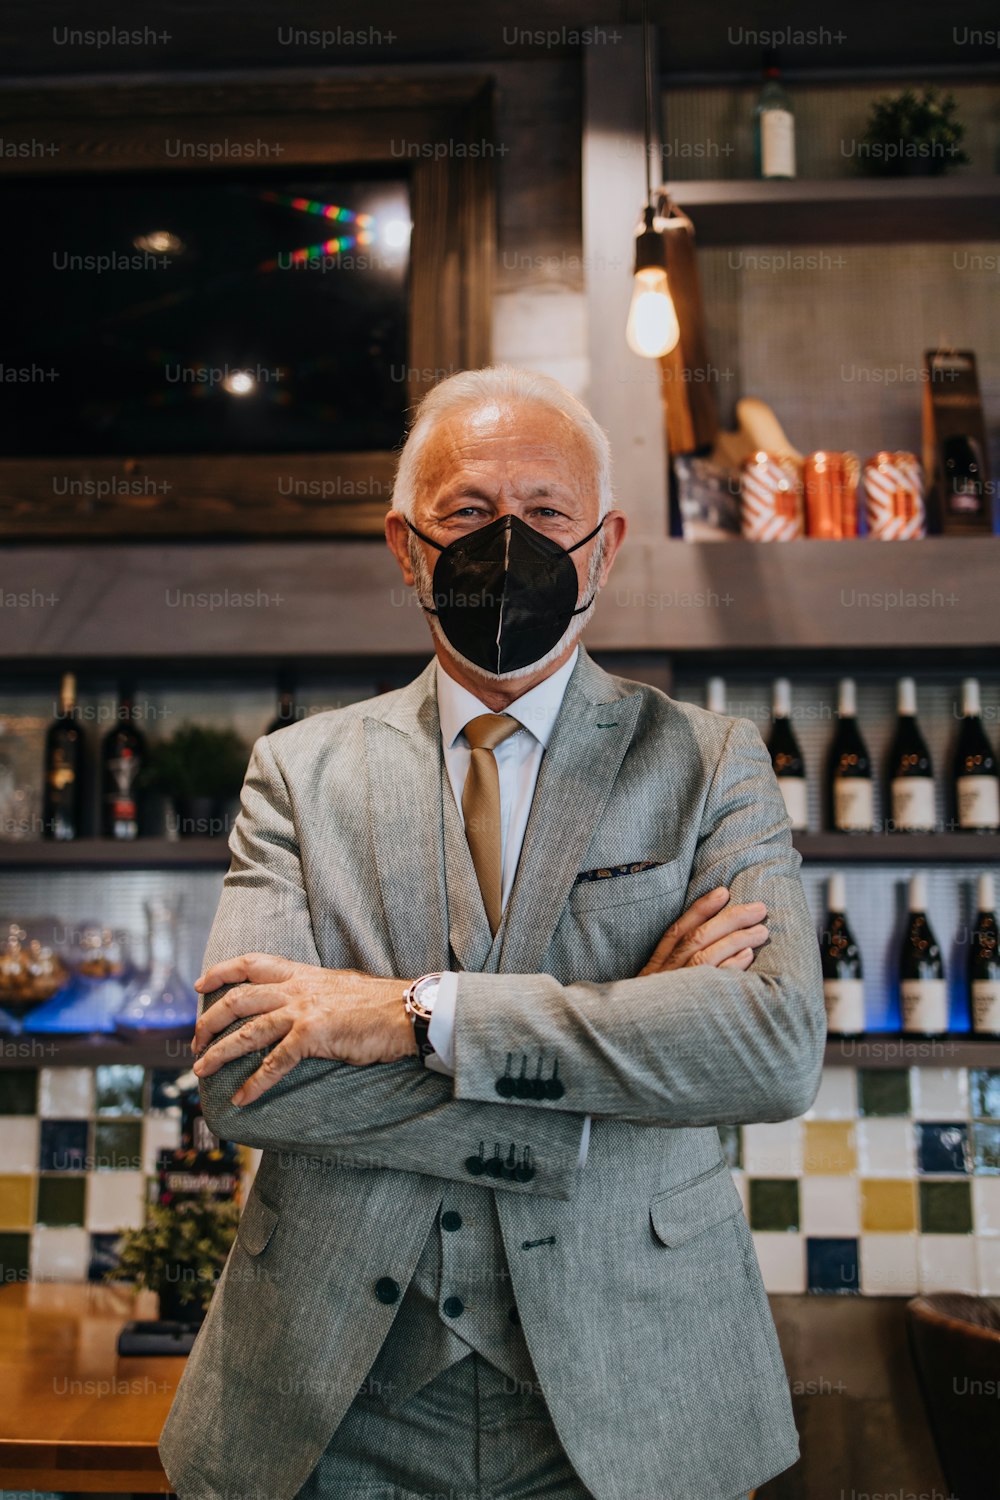 Confident senior businessman standing in exclusive restaurant. He is wearing protective N-95 face mask as protection against virus infection. Coronavirus senior people lifestyle concept.